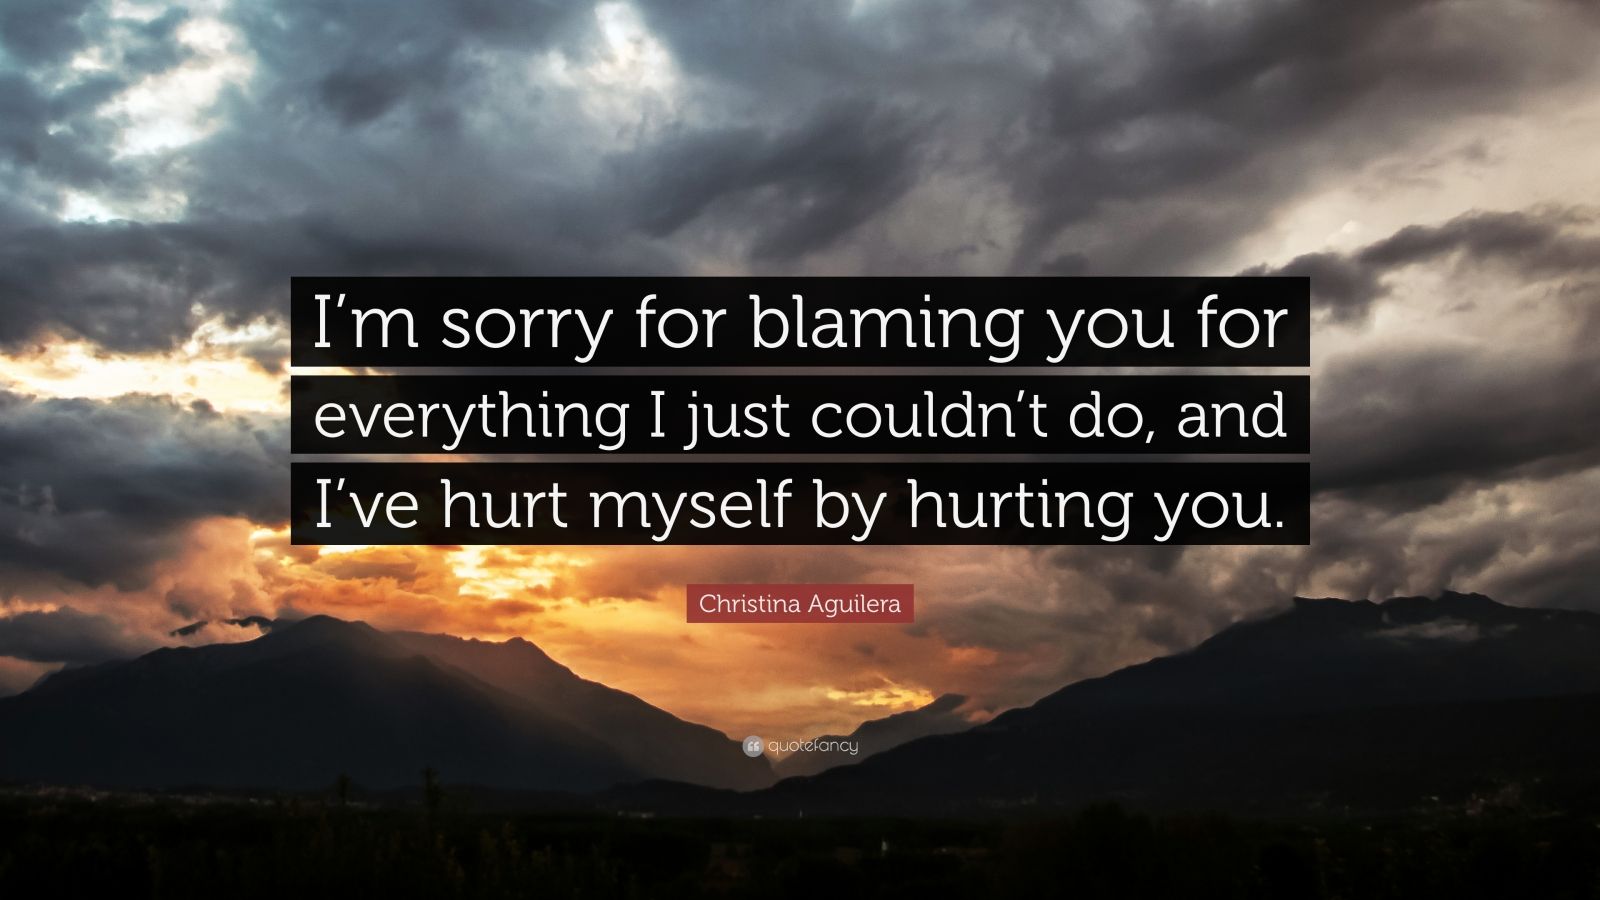 Christina Aguilera Quote “im Sorry For Blaming You For Everything I